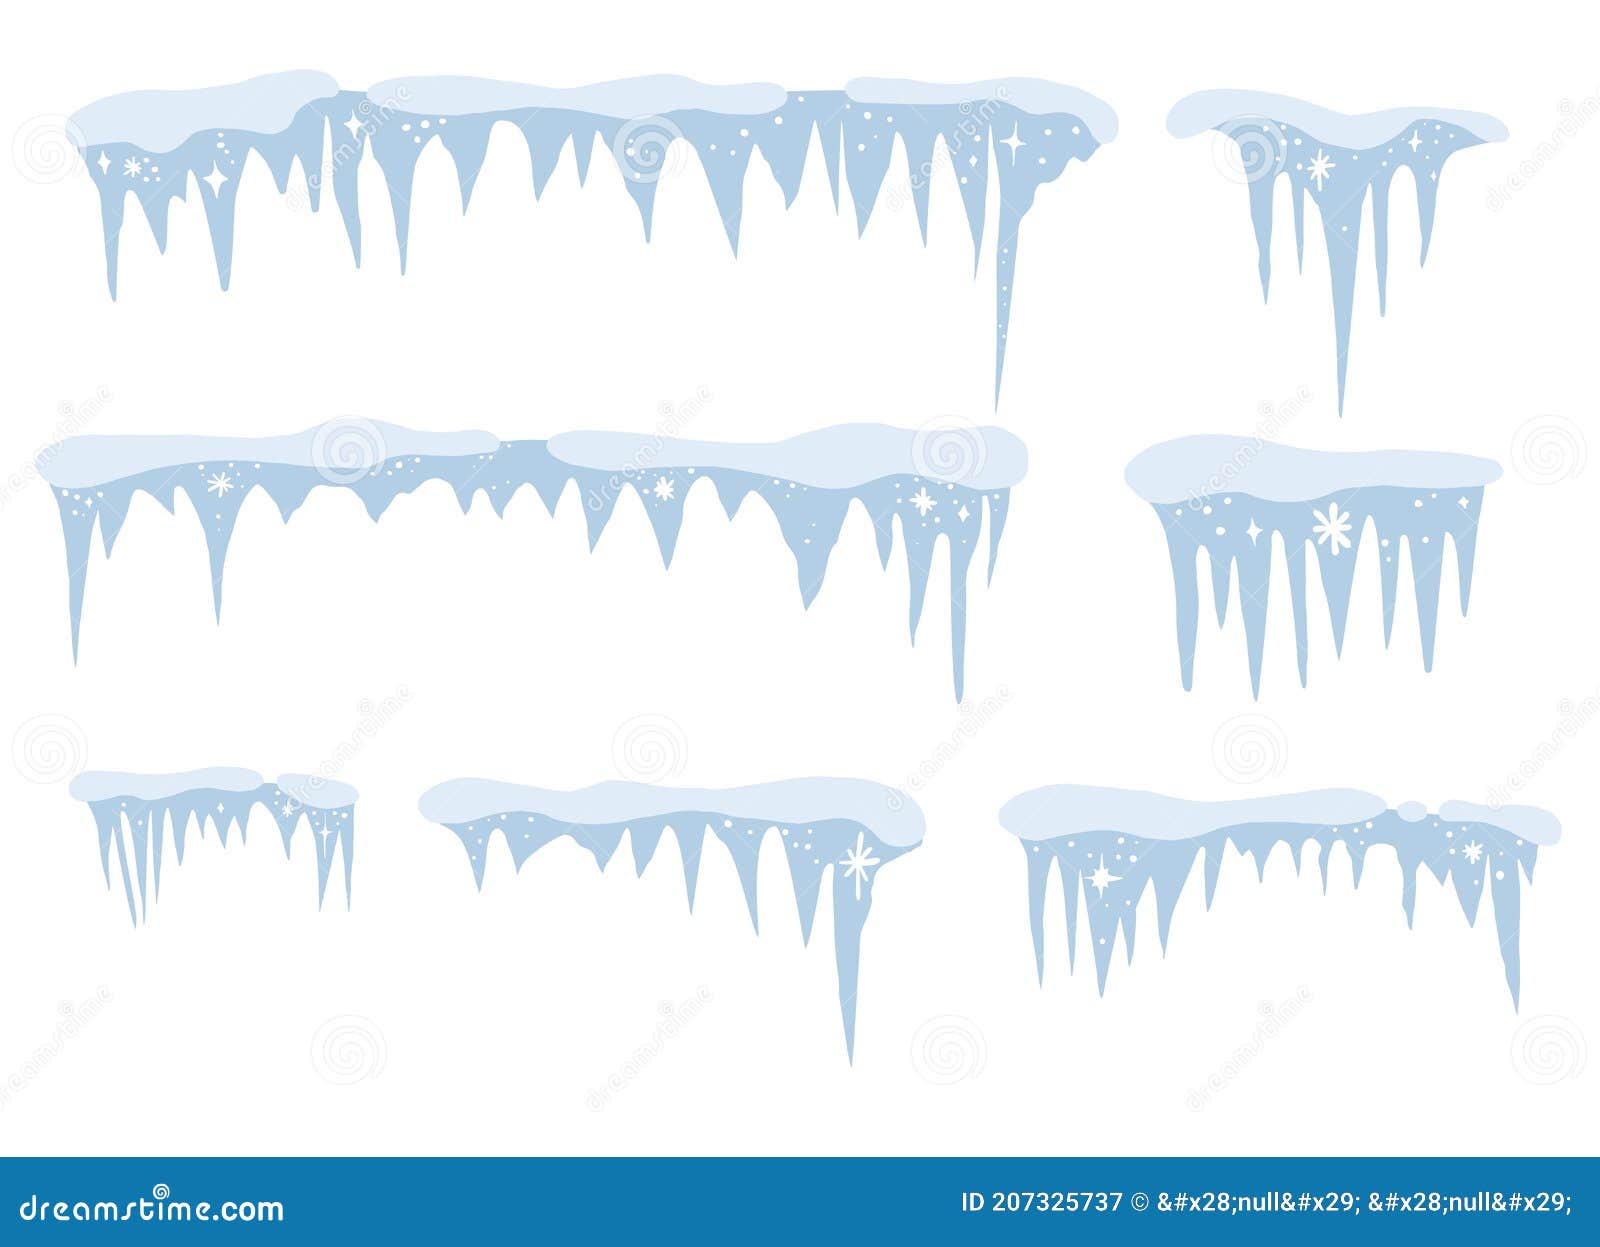 snow and ice  frames.winter cartoon caps, snowdrifts and icicles.background snowcap borders.snowy s.flat style decora